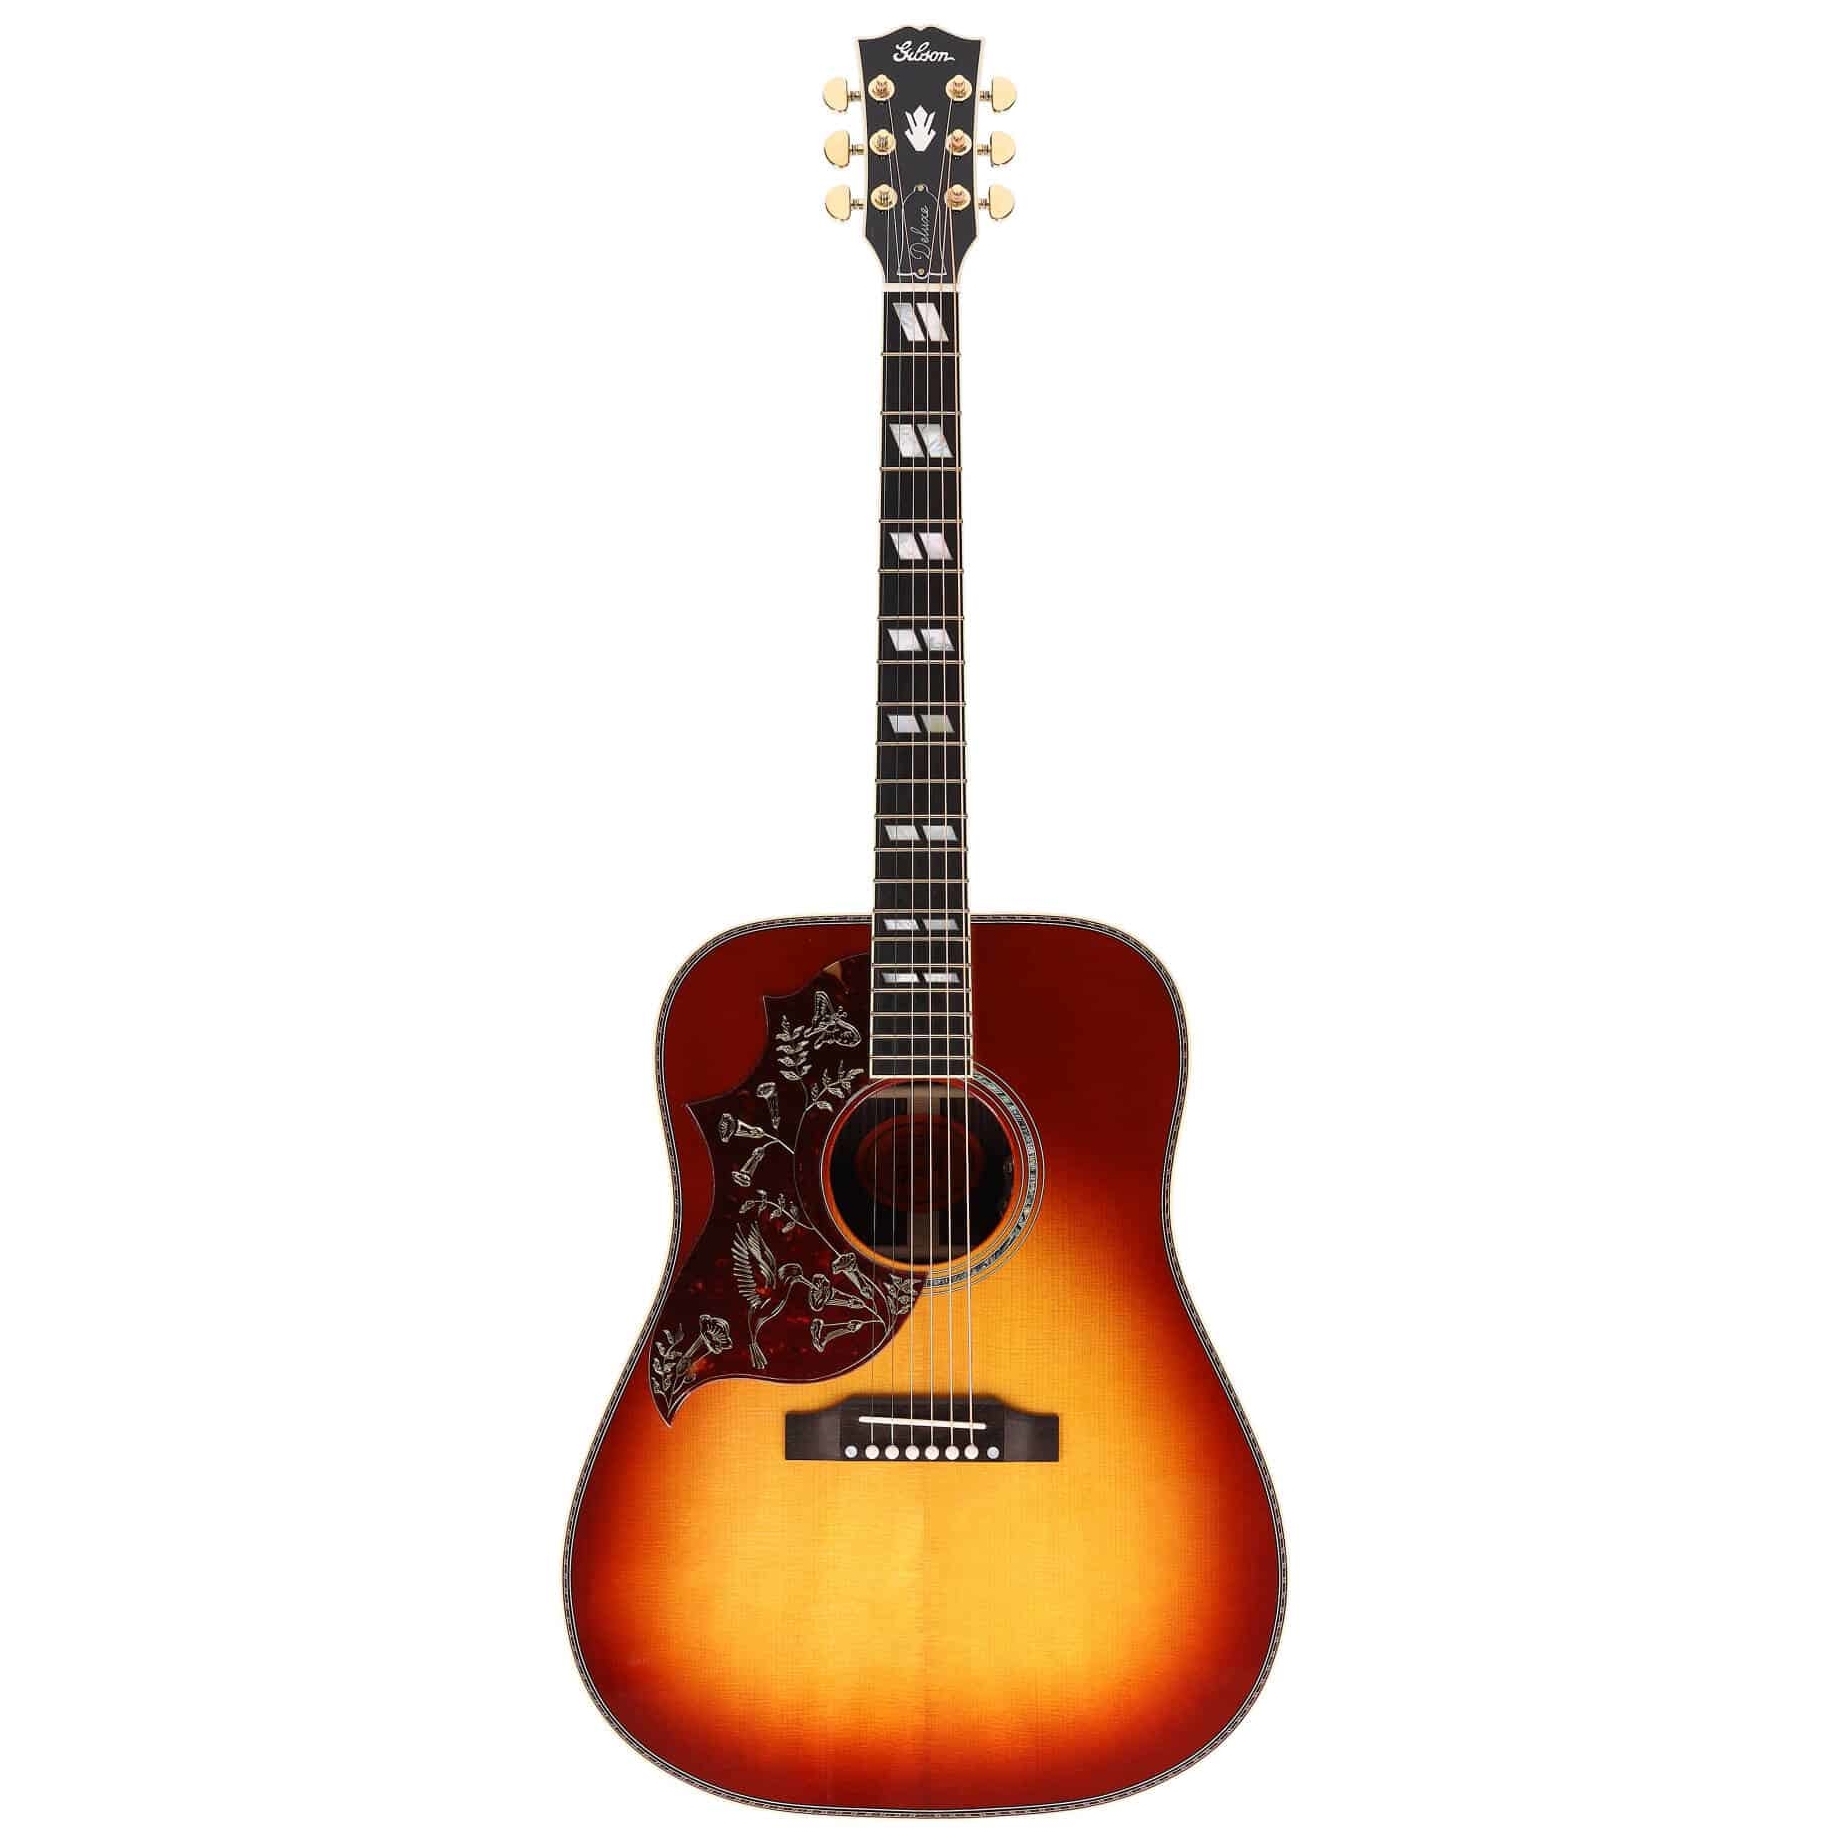 Gibson Hummingbird acoustic guitar series | Info & Models | session